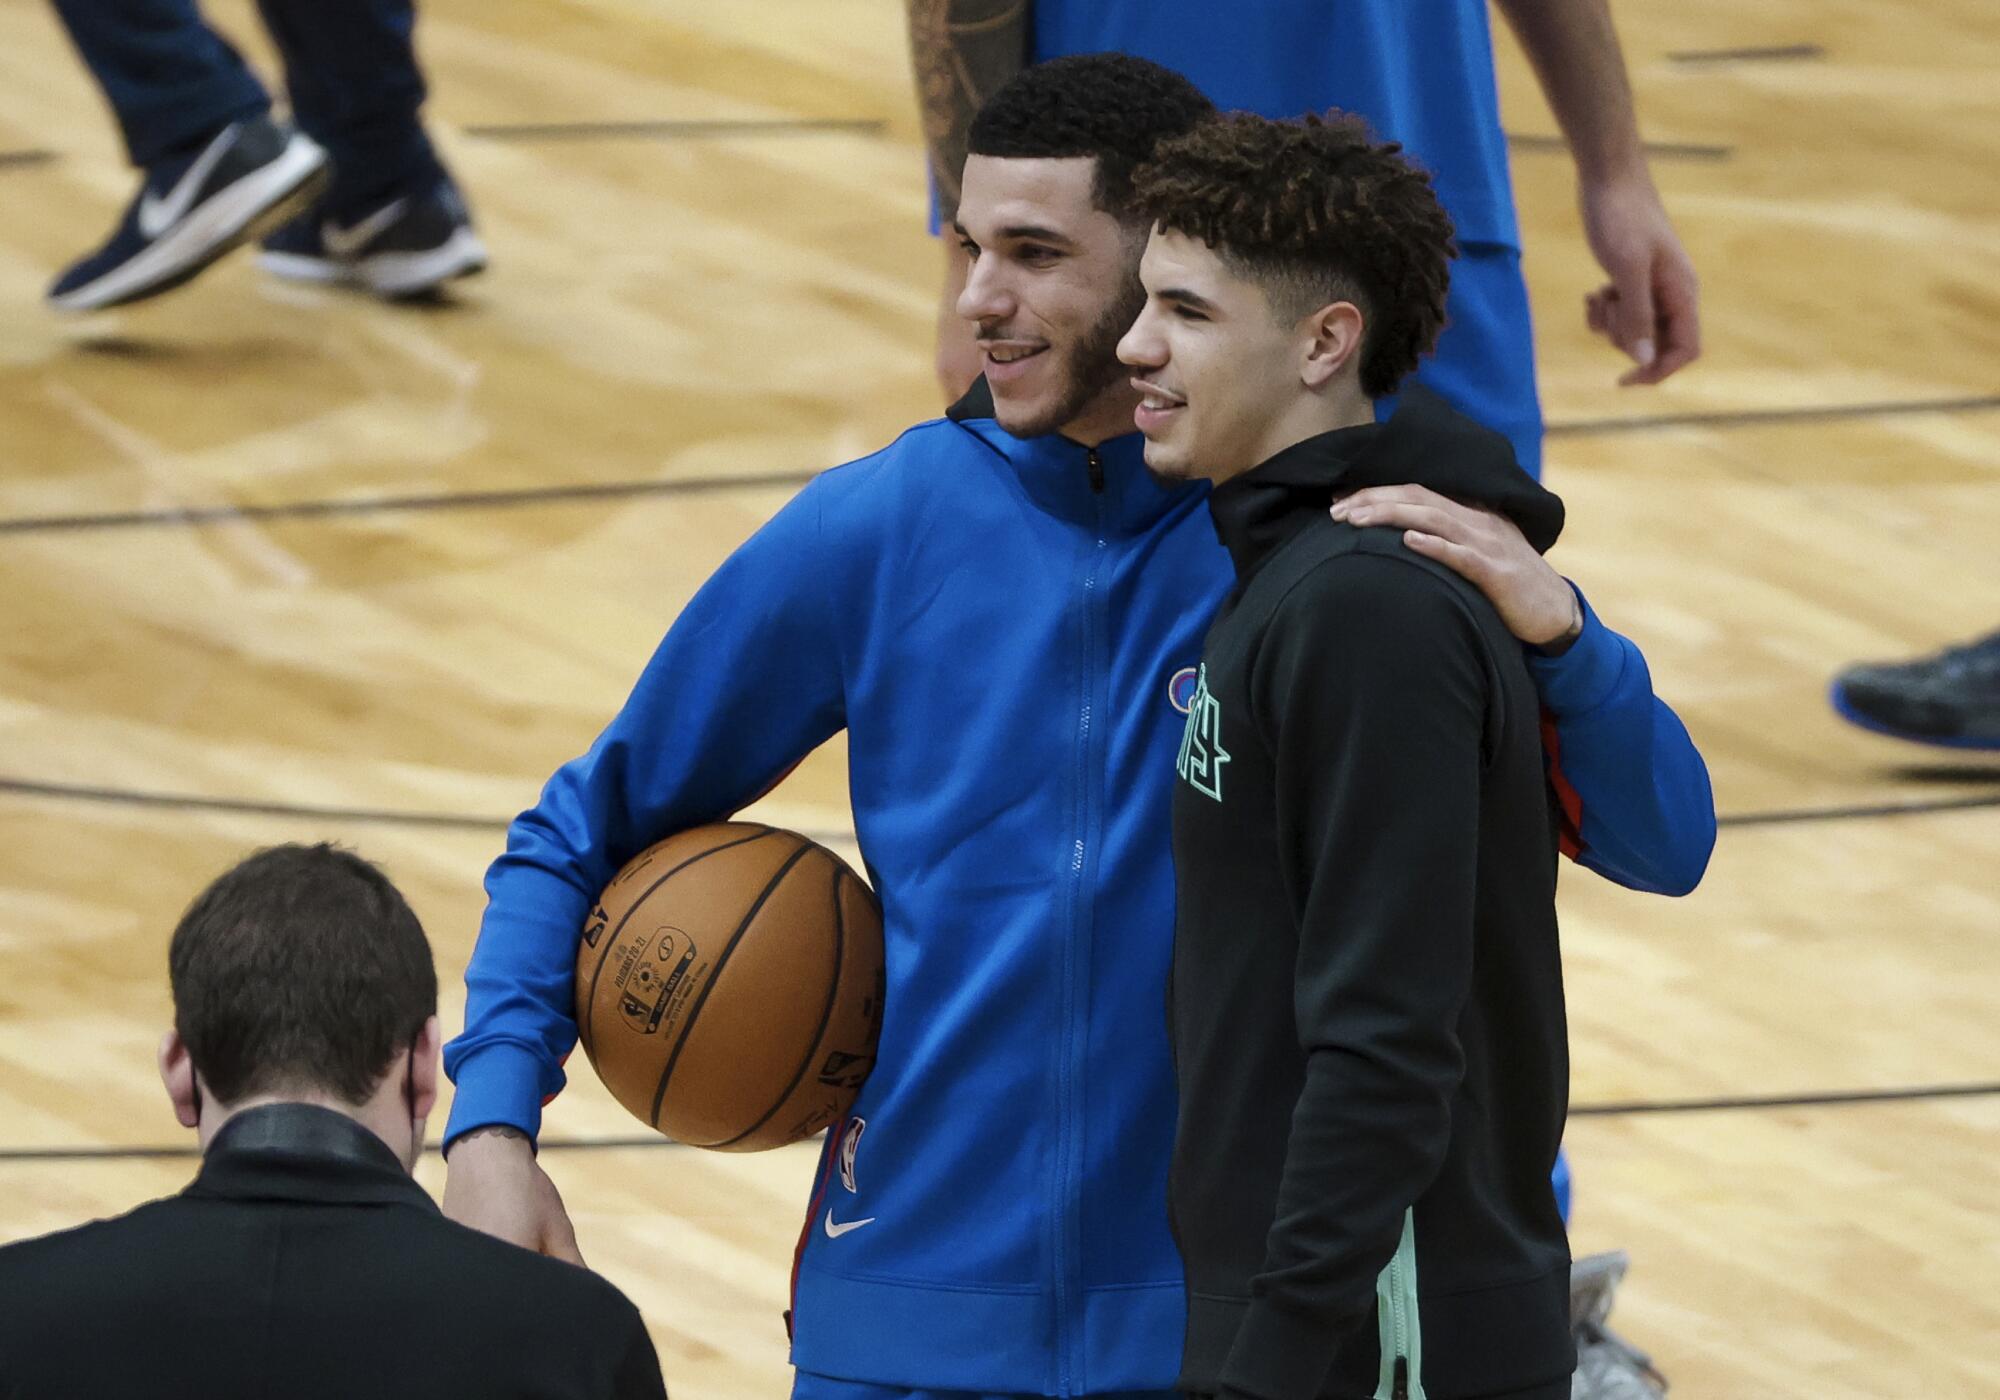 Lonzo, left, and LaMelo Ball pose for a photo before their first NBA game playing each other on Jan. 7, 2020.